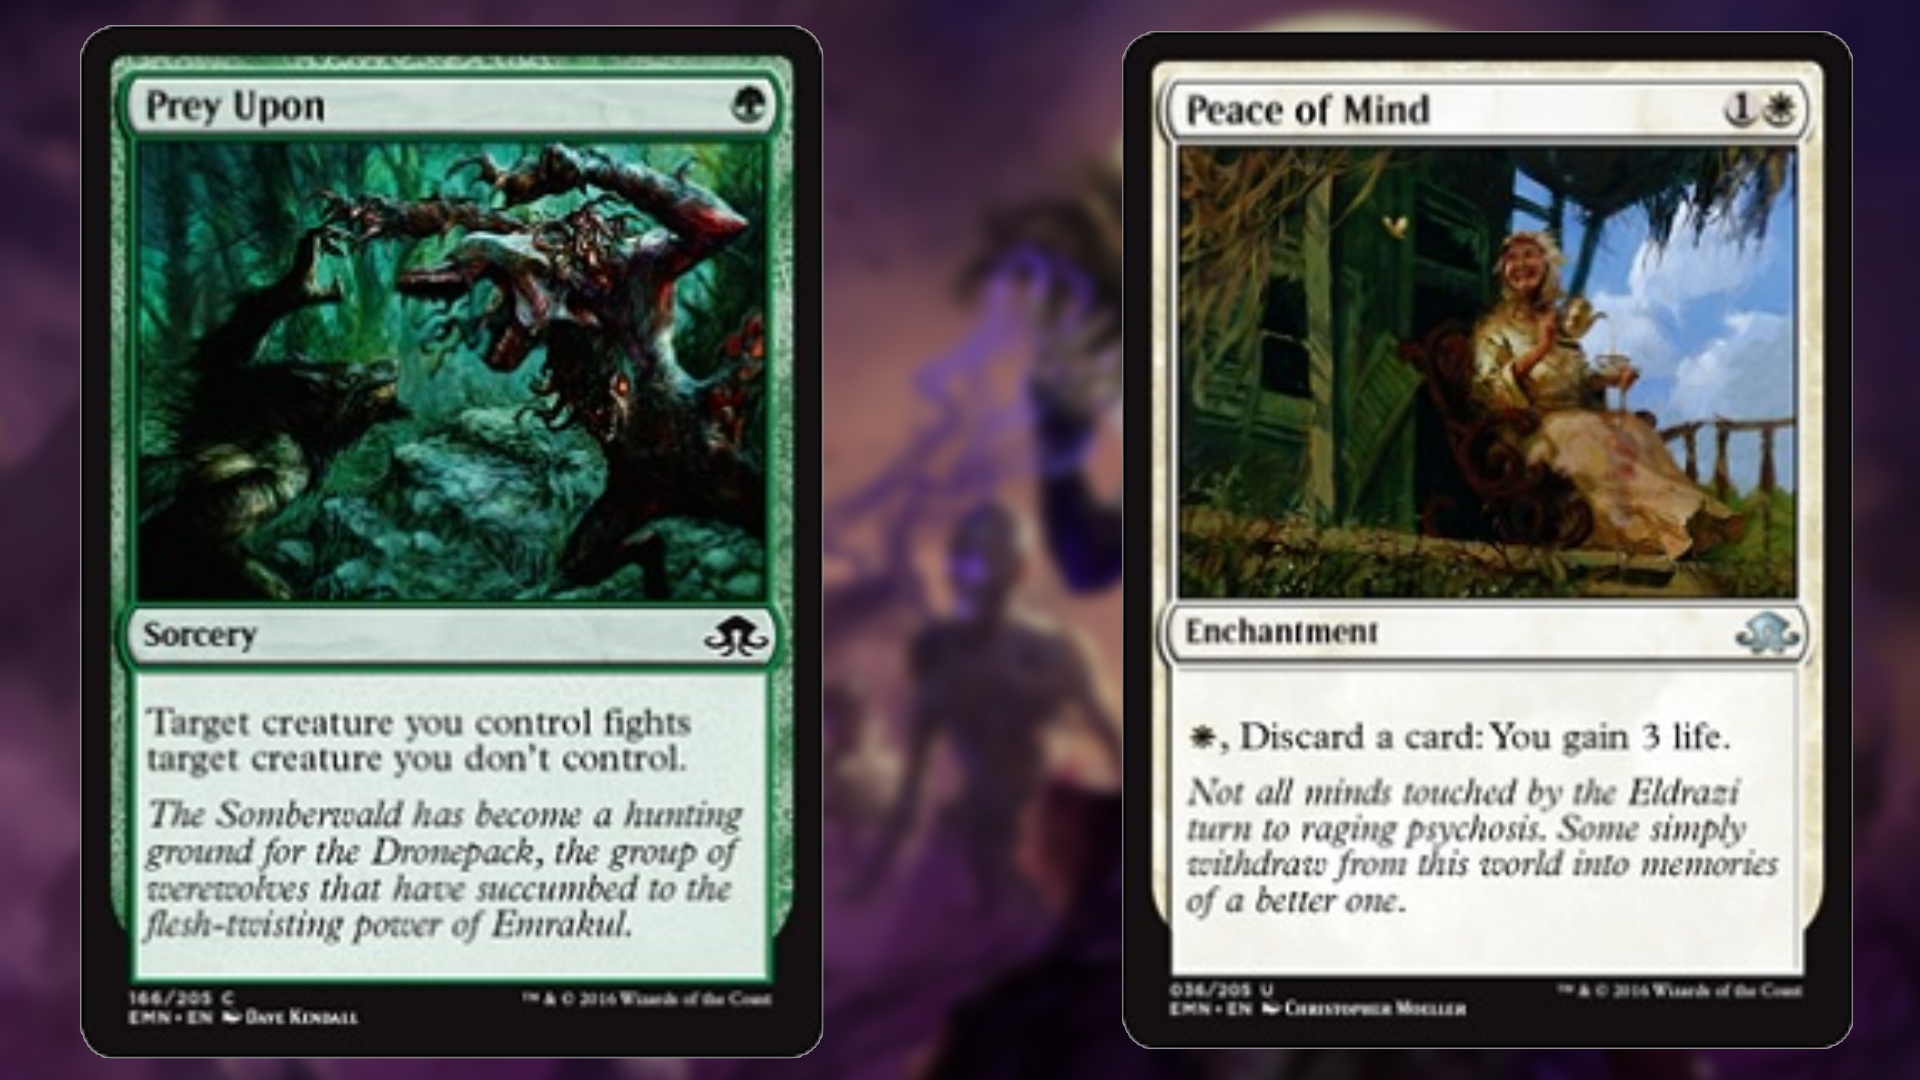 magic the gathering cards two in a row the first green with a horrific creature facing off against a werewolf while other features a person at peace